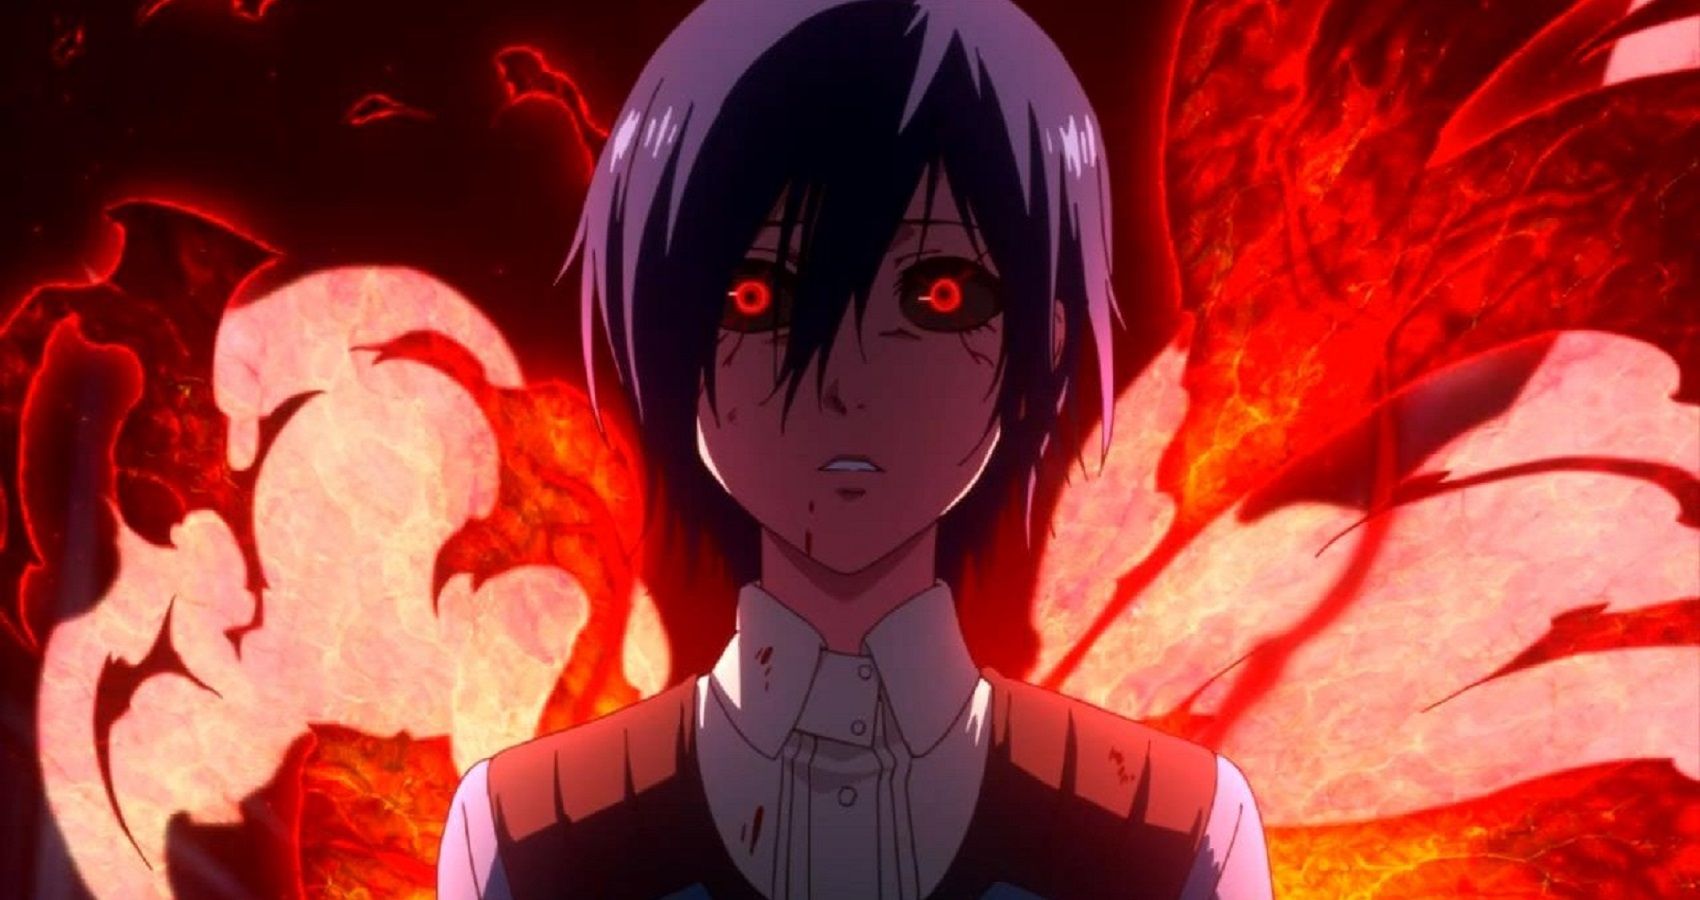 Tokyo Ghoul: 5 Things We Love About the Anime (& 5 Things We Don't)